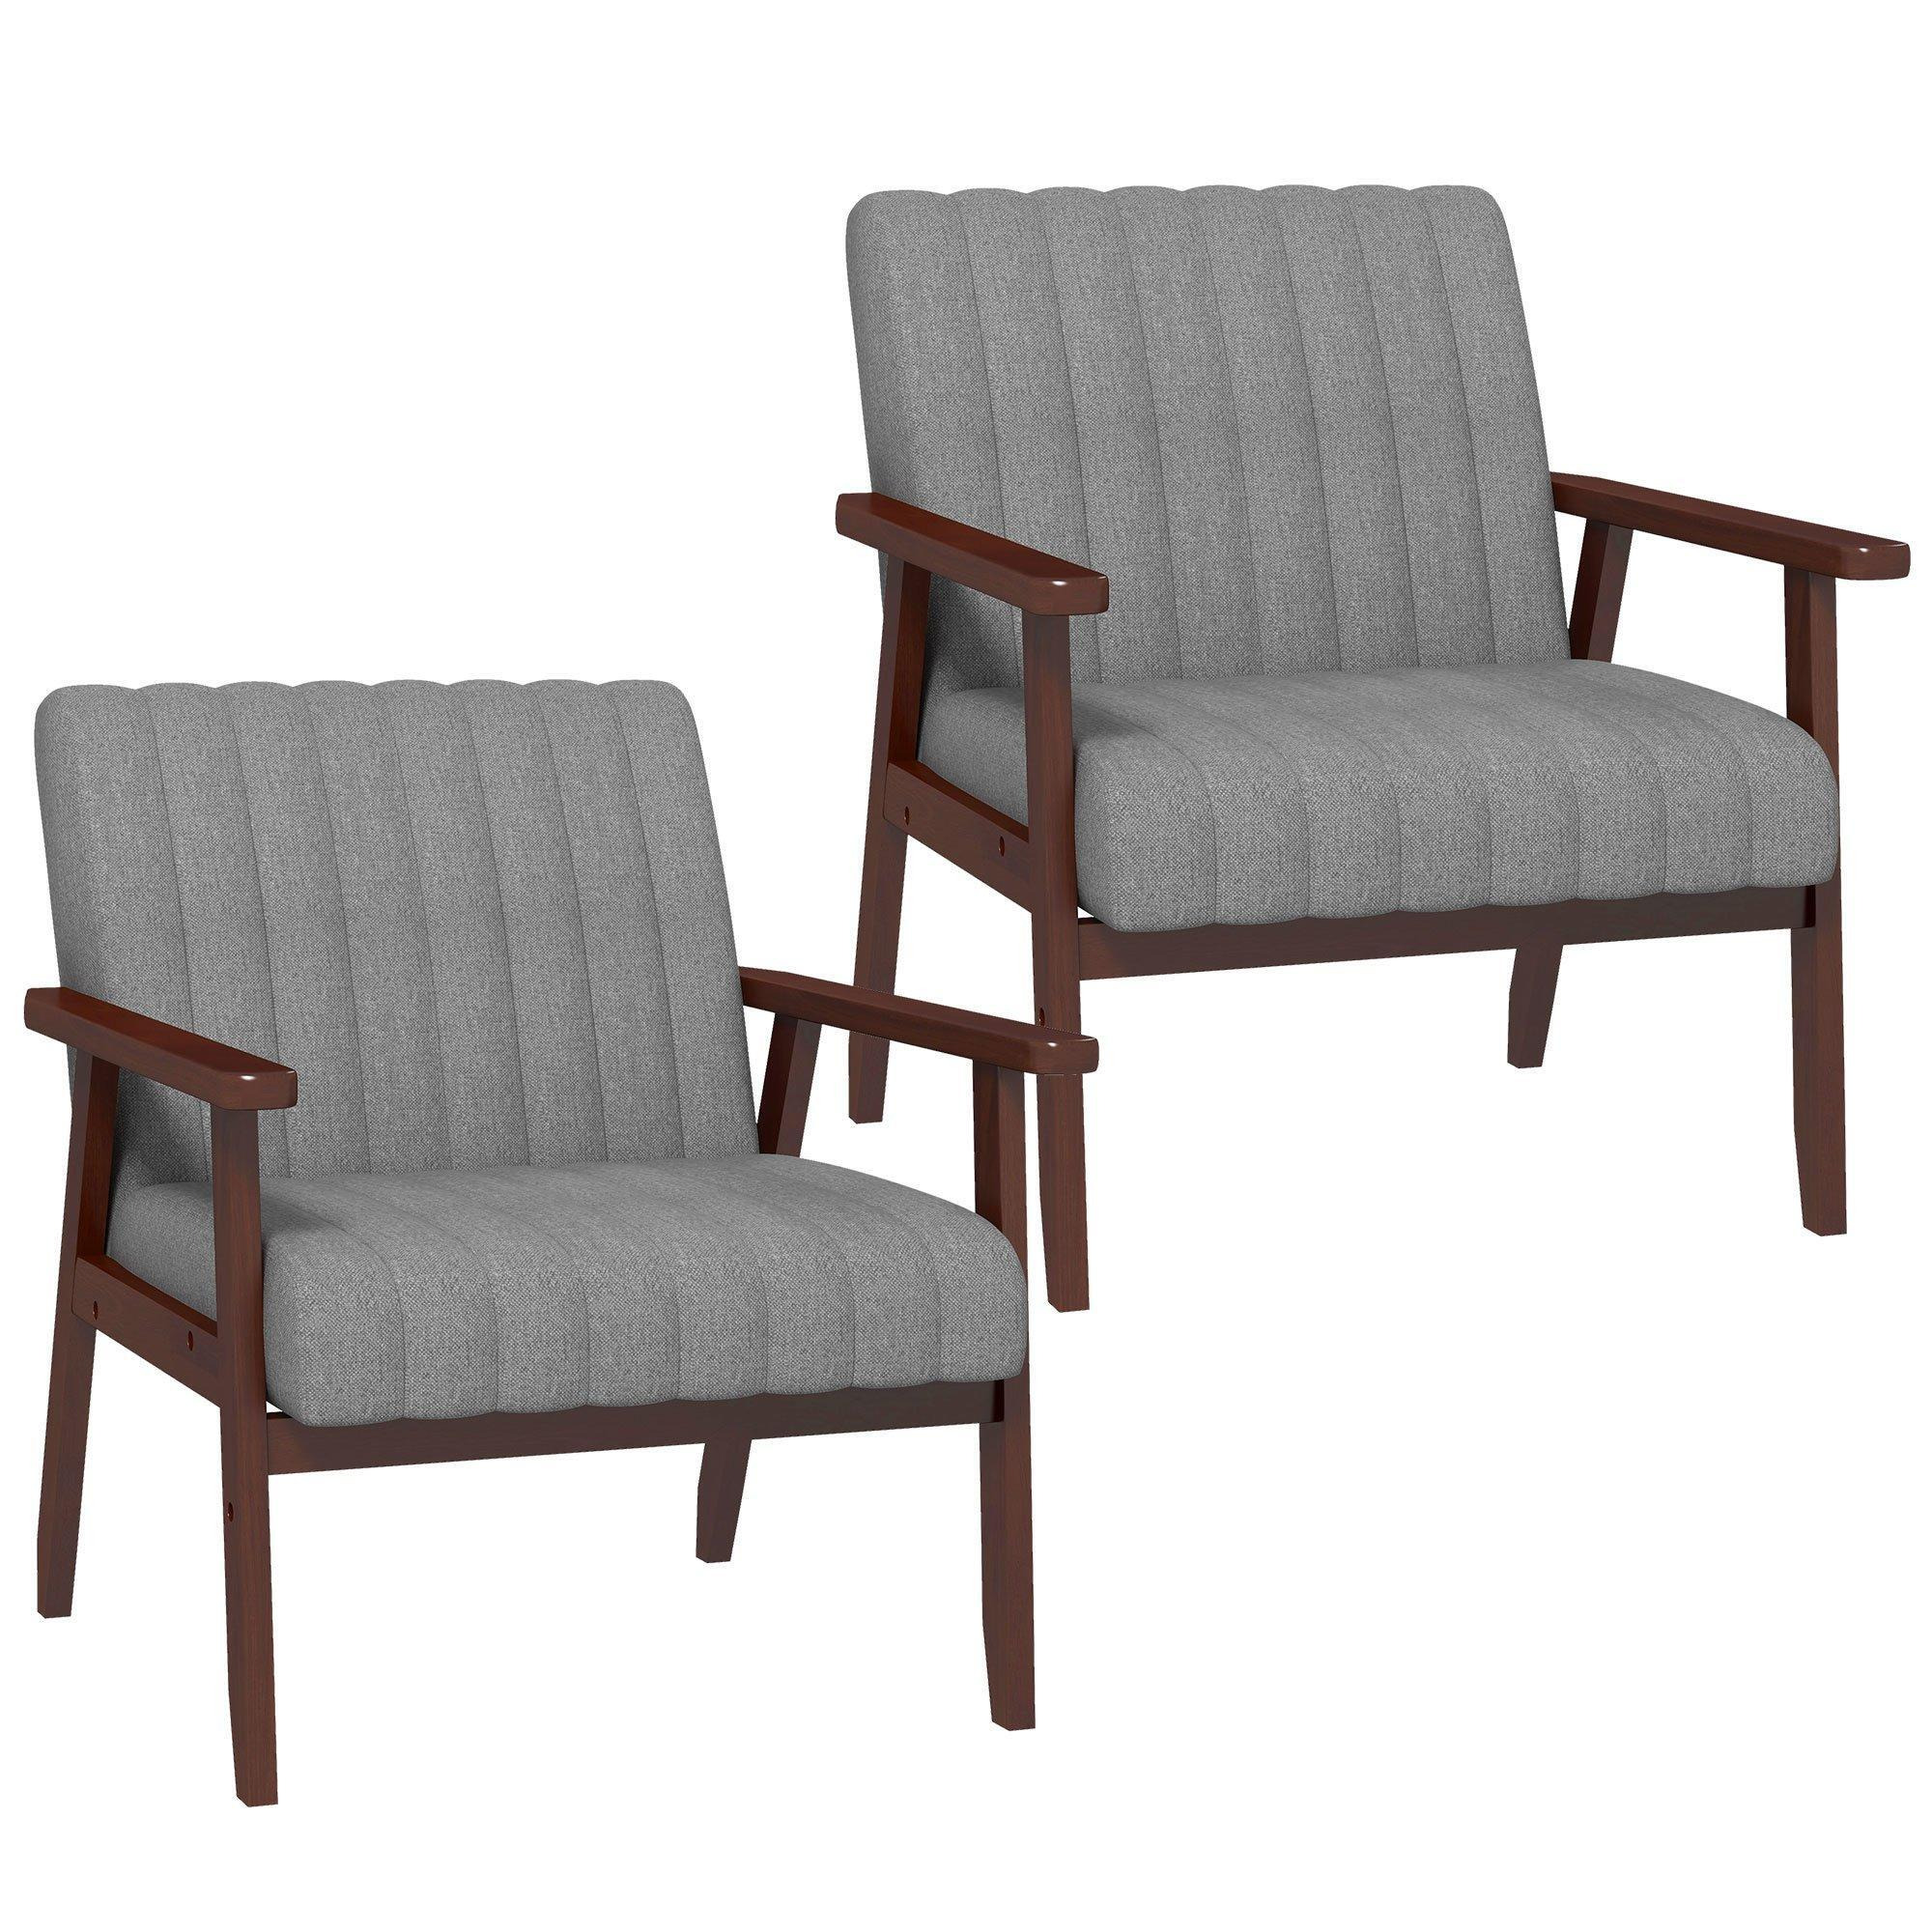 Fabric Accent Chairs Set of 2 with Channel Tufting Pattern Wood Legs - image 1